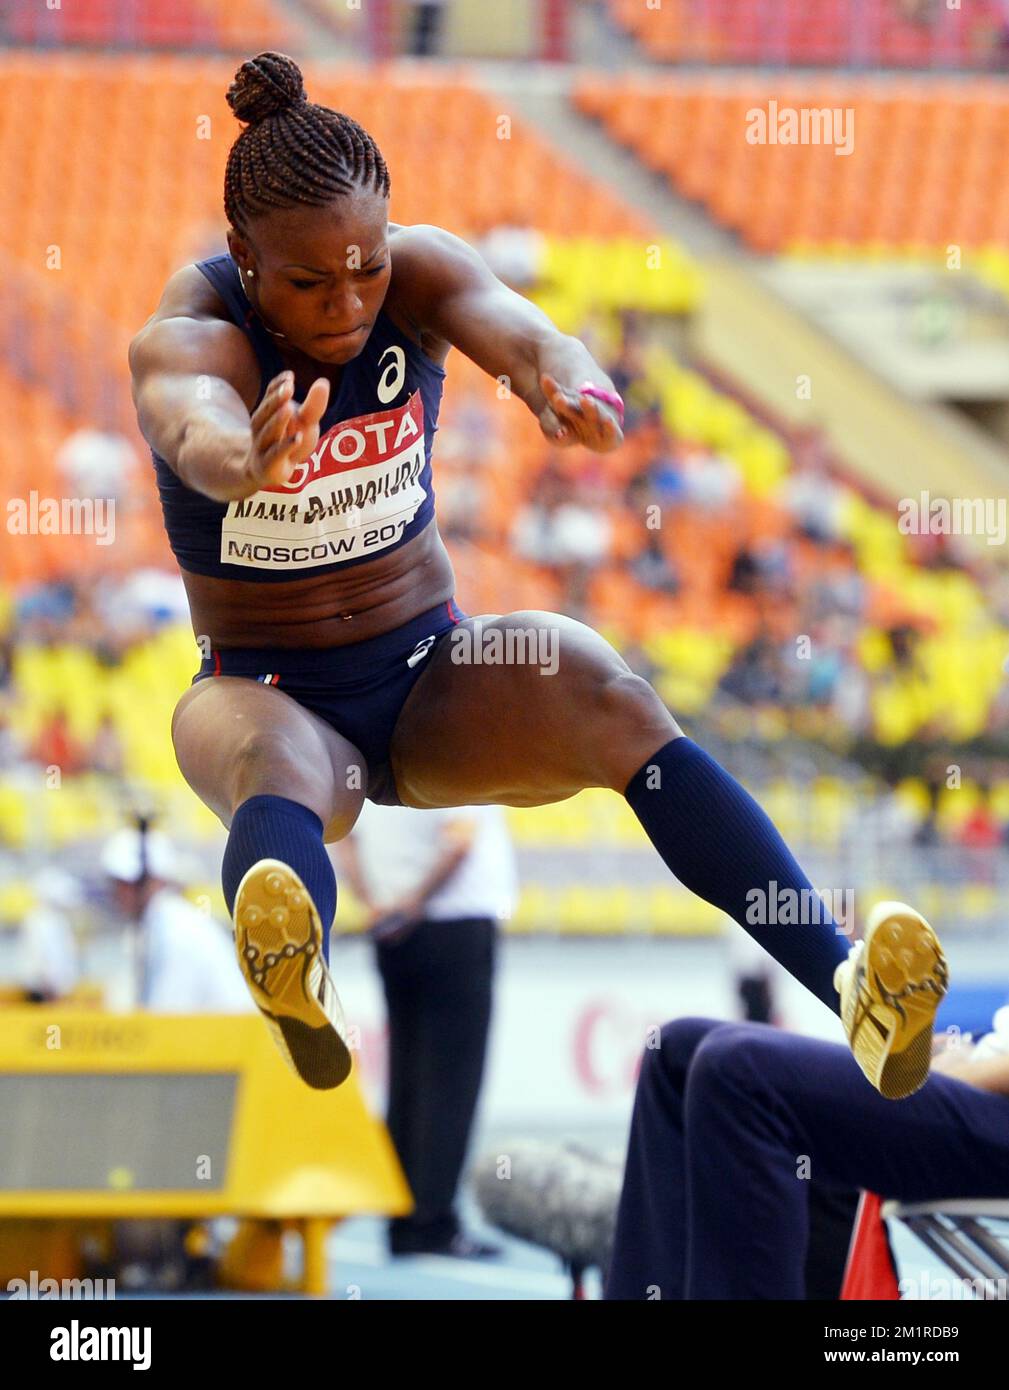 French Antoinette Nana Djimou Ida in action during the women's long jump competition on the second day of the women heptathlon at the World Athletics Championships at the Luzhniki Stadium in Moscow, Russia, Tuesday 13 August 2013. The World Championships are taking place from 10 to 18 August.  Stock Photo